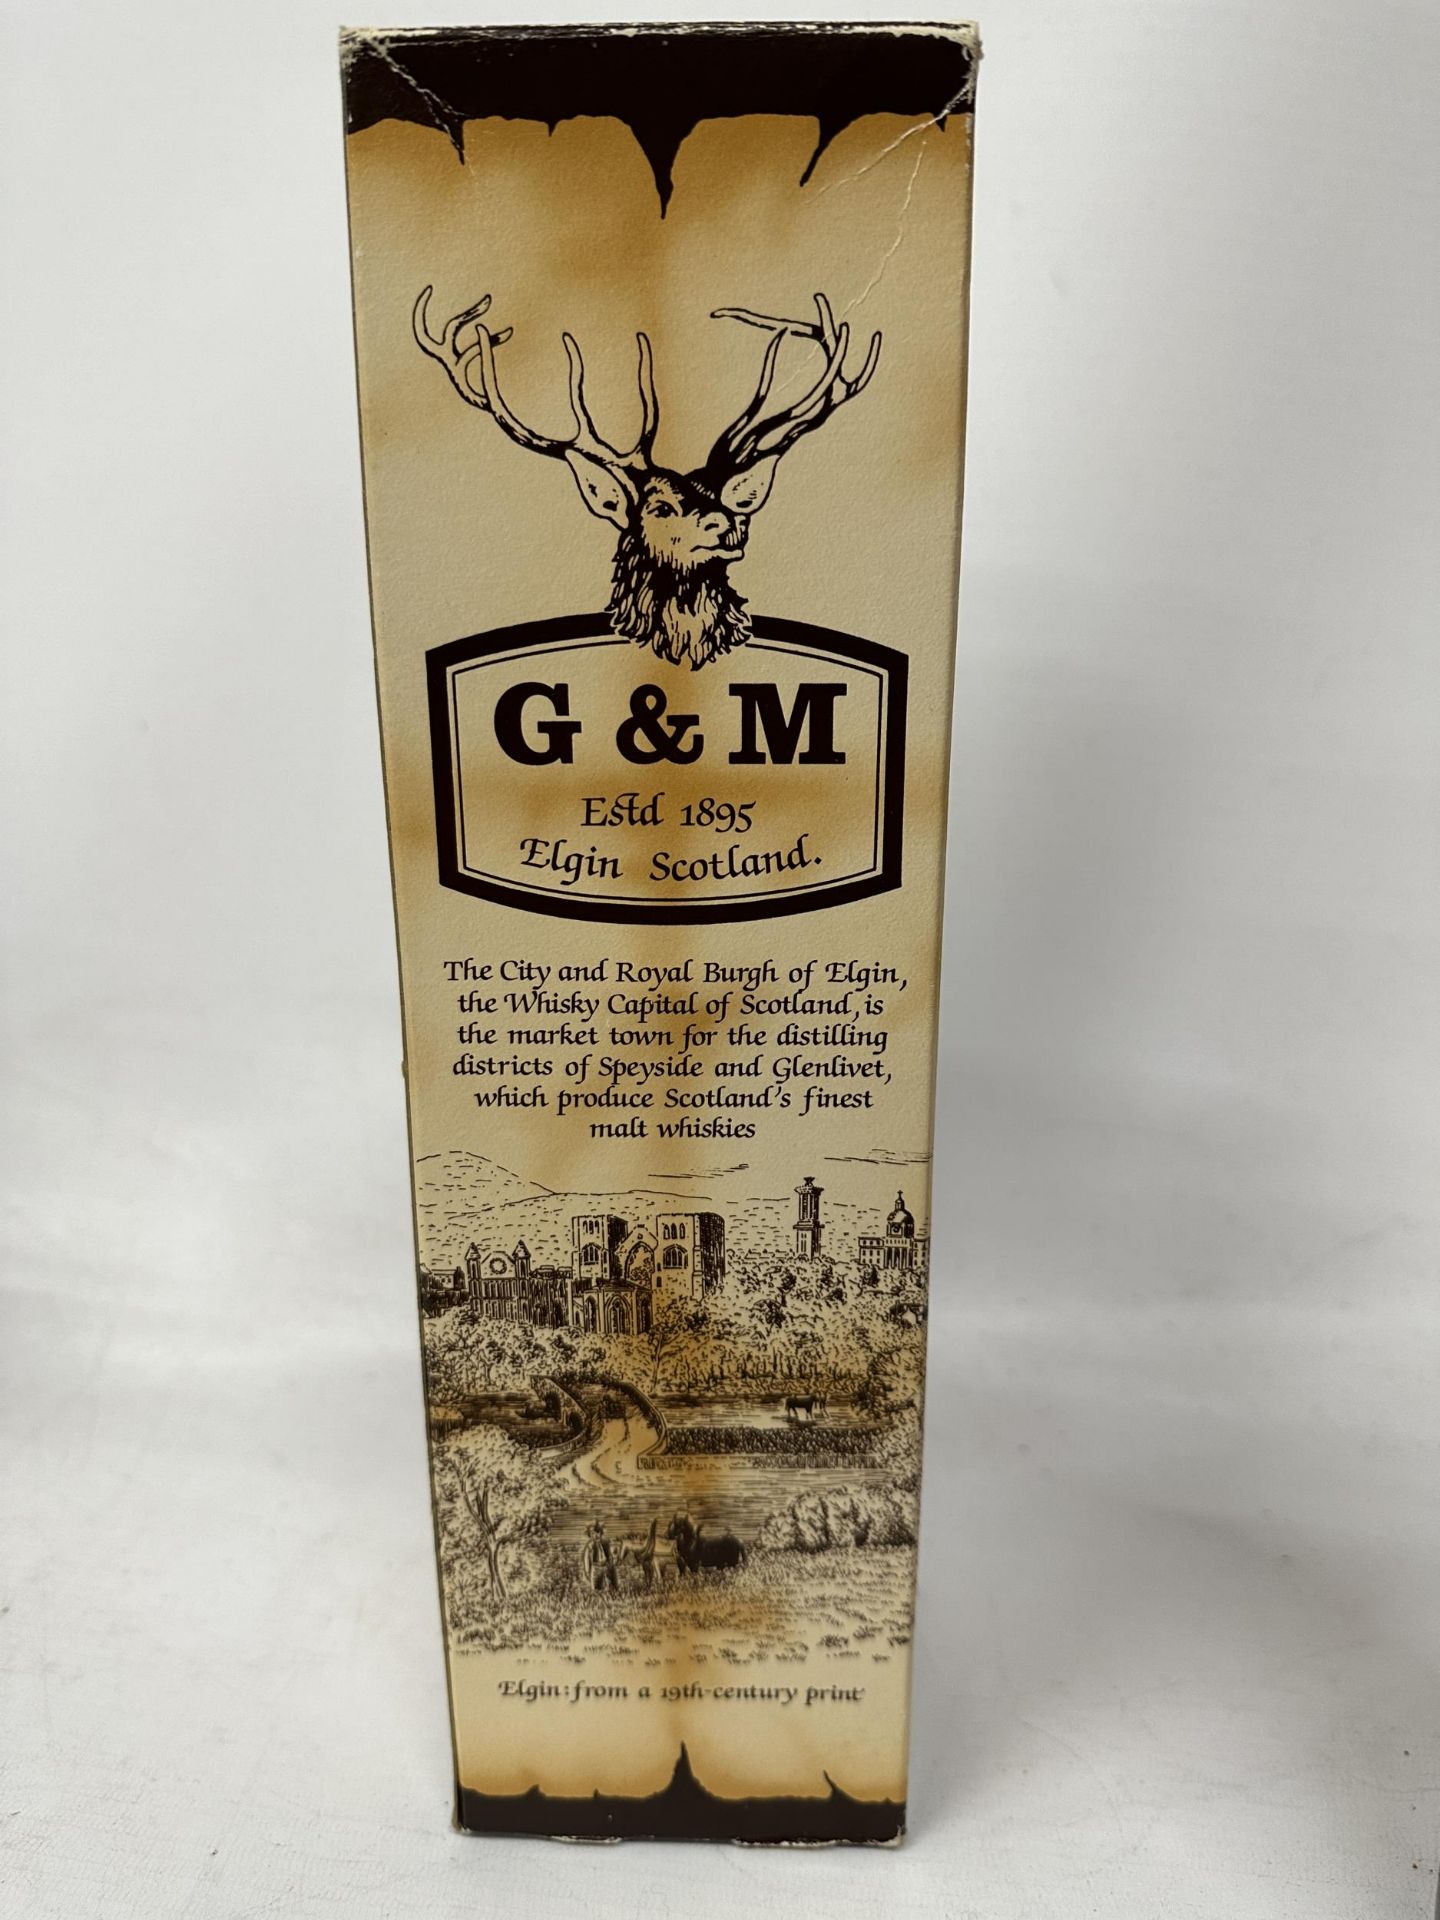 A BOXED 1960 BOTTLE OF GORDON & MACPHAIL CONNOISSEURS CHOICE 25 YEAR OLD SCOTCH HIGHLAND MALT WHISKY - Image 4 of 5